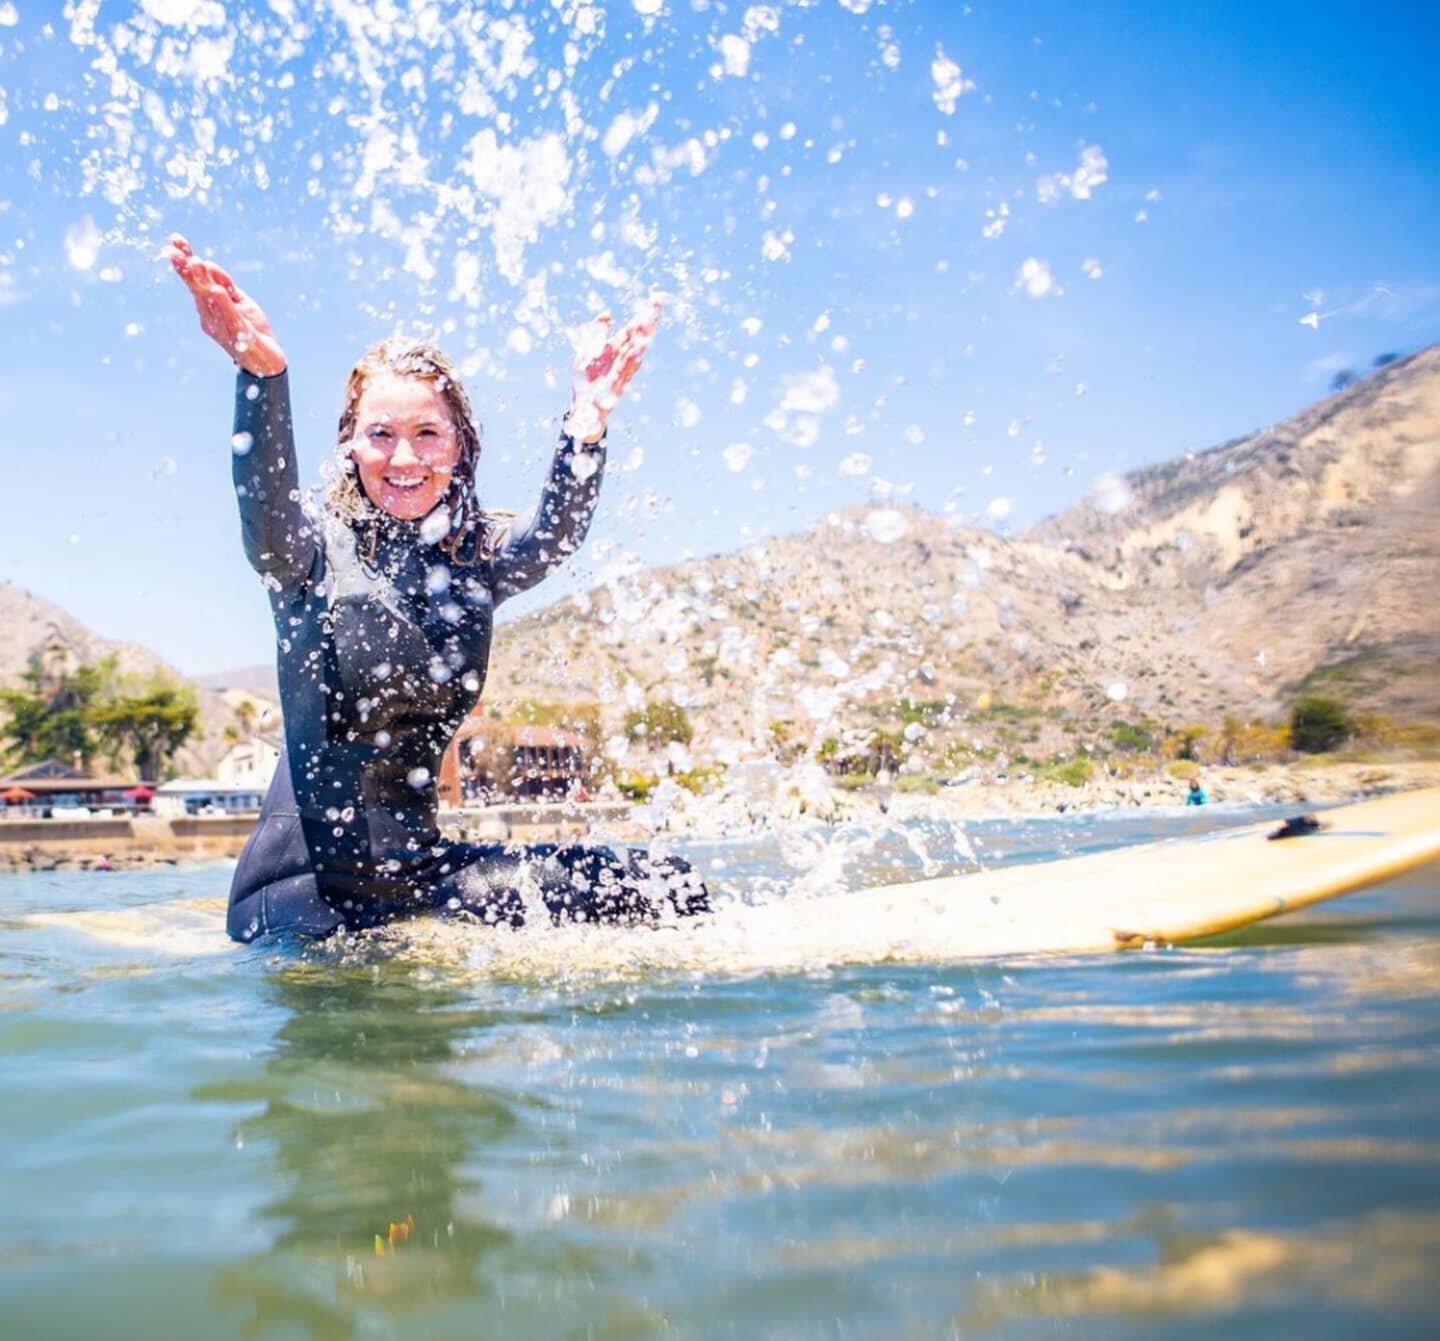 Wishing you all a fun and safe 4th of July weekend 🇺🇸 
📷 by @visitventura Smile provided by @surfsunstephanie
#happy4thofjuly #usa #staysafe #havefun #enjoy #sohappy #life #freedom #liberty #justice #wavesforall #liveingratitude